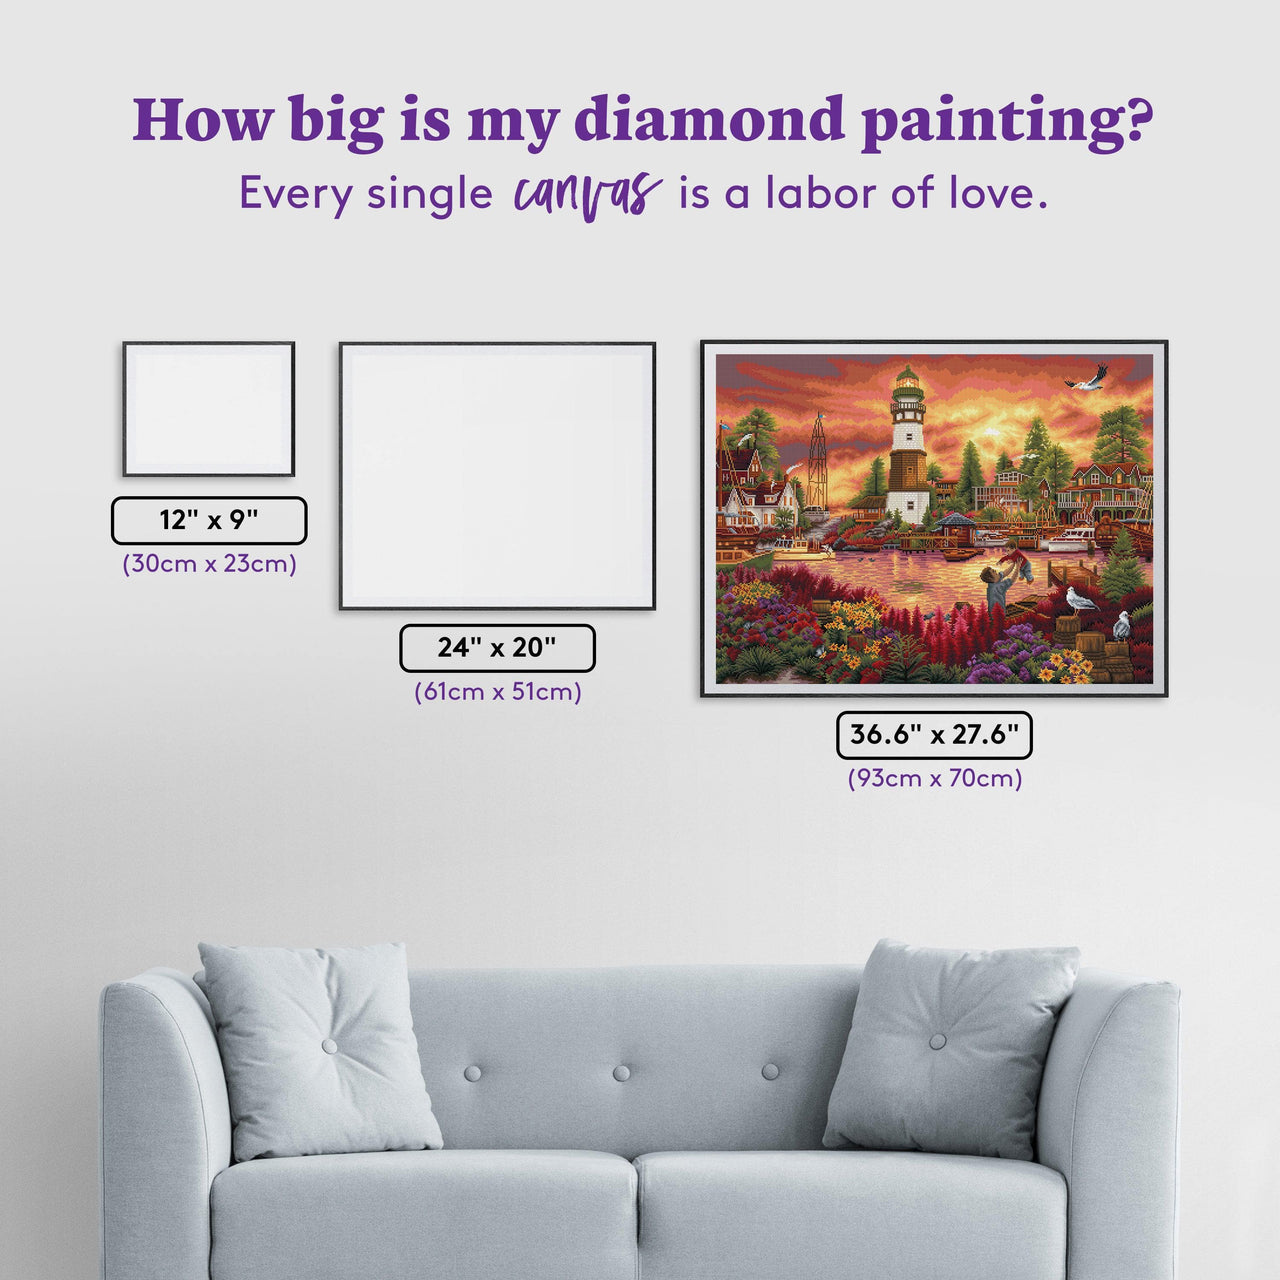 Diamond Painting Love Lifted Me 36.6" x 27.6" (93cm x 70cm) / Square With 60 Colors Including 2 ABs and 2 Fairy Dust Diamonds / 104,813